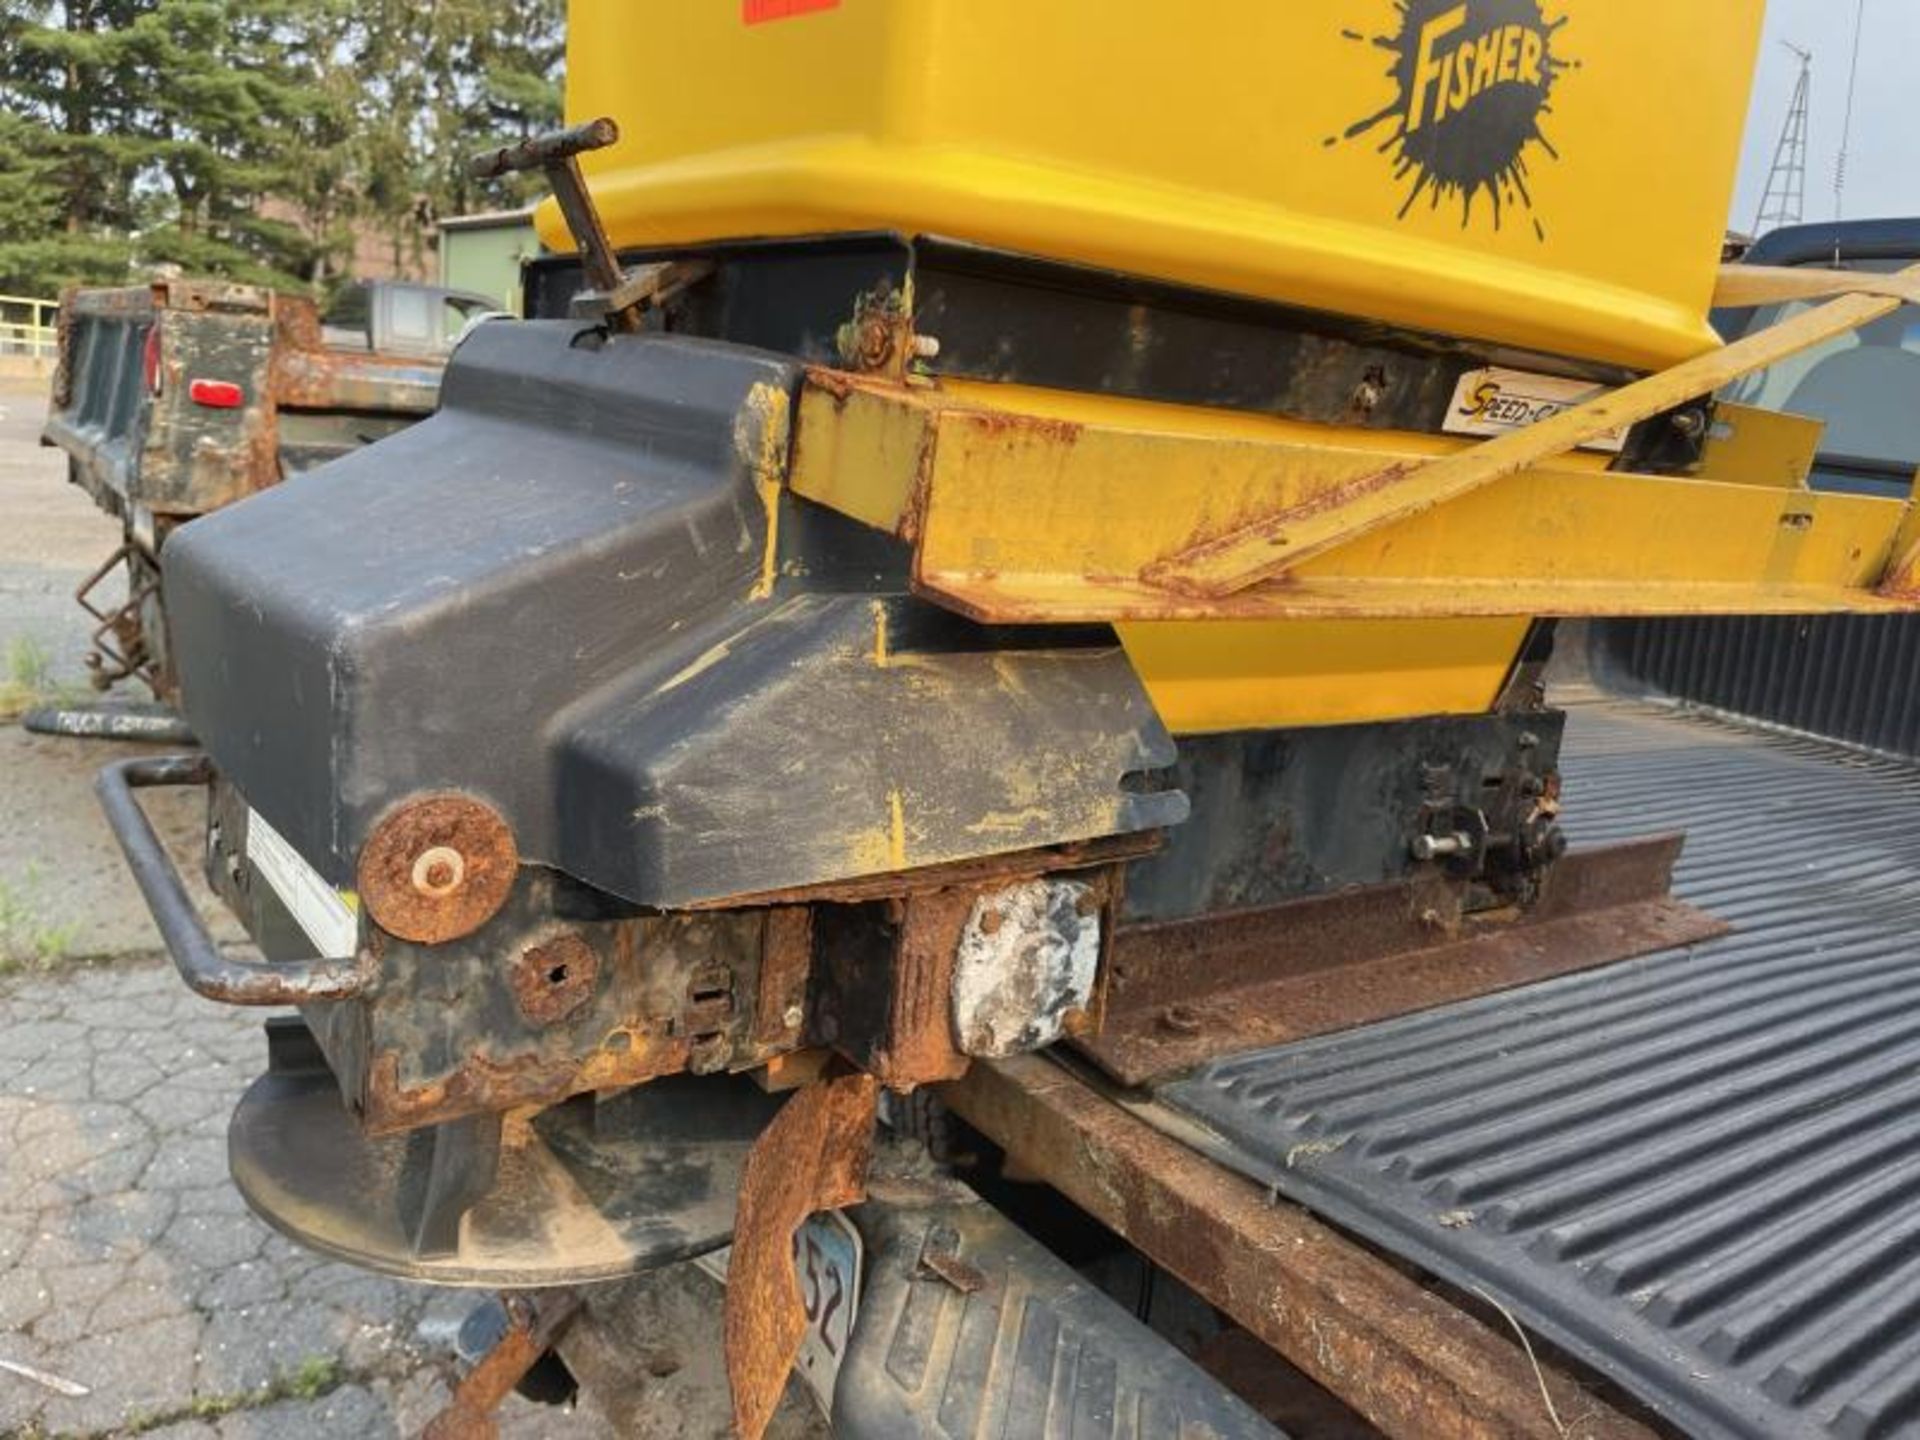 Fisher speed caster 2 stage spreader 12V truck mounter SN: 205063 (Buyer responsible for disconnecti - Image 3 of 6